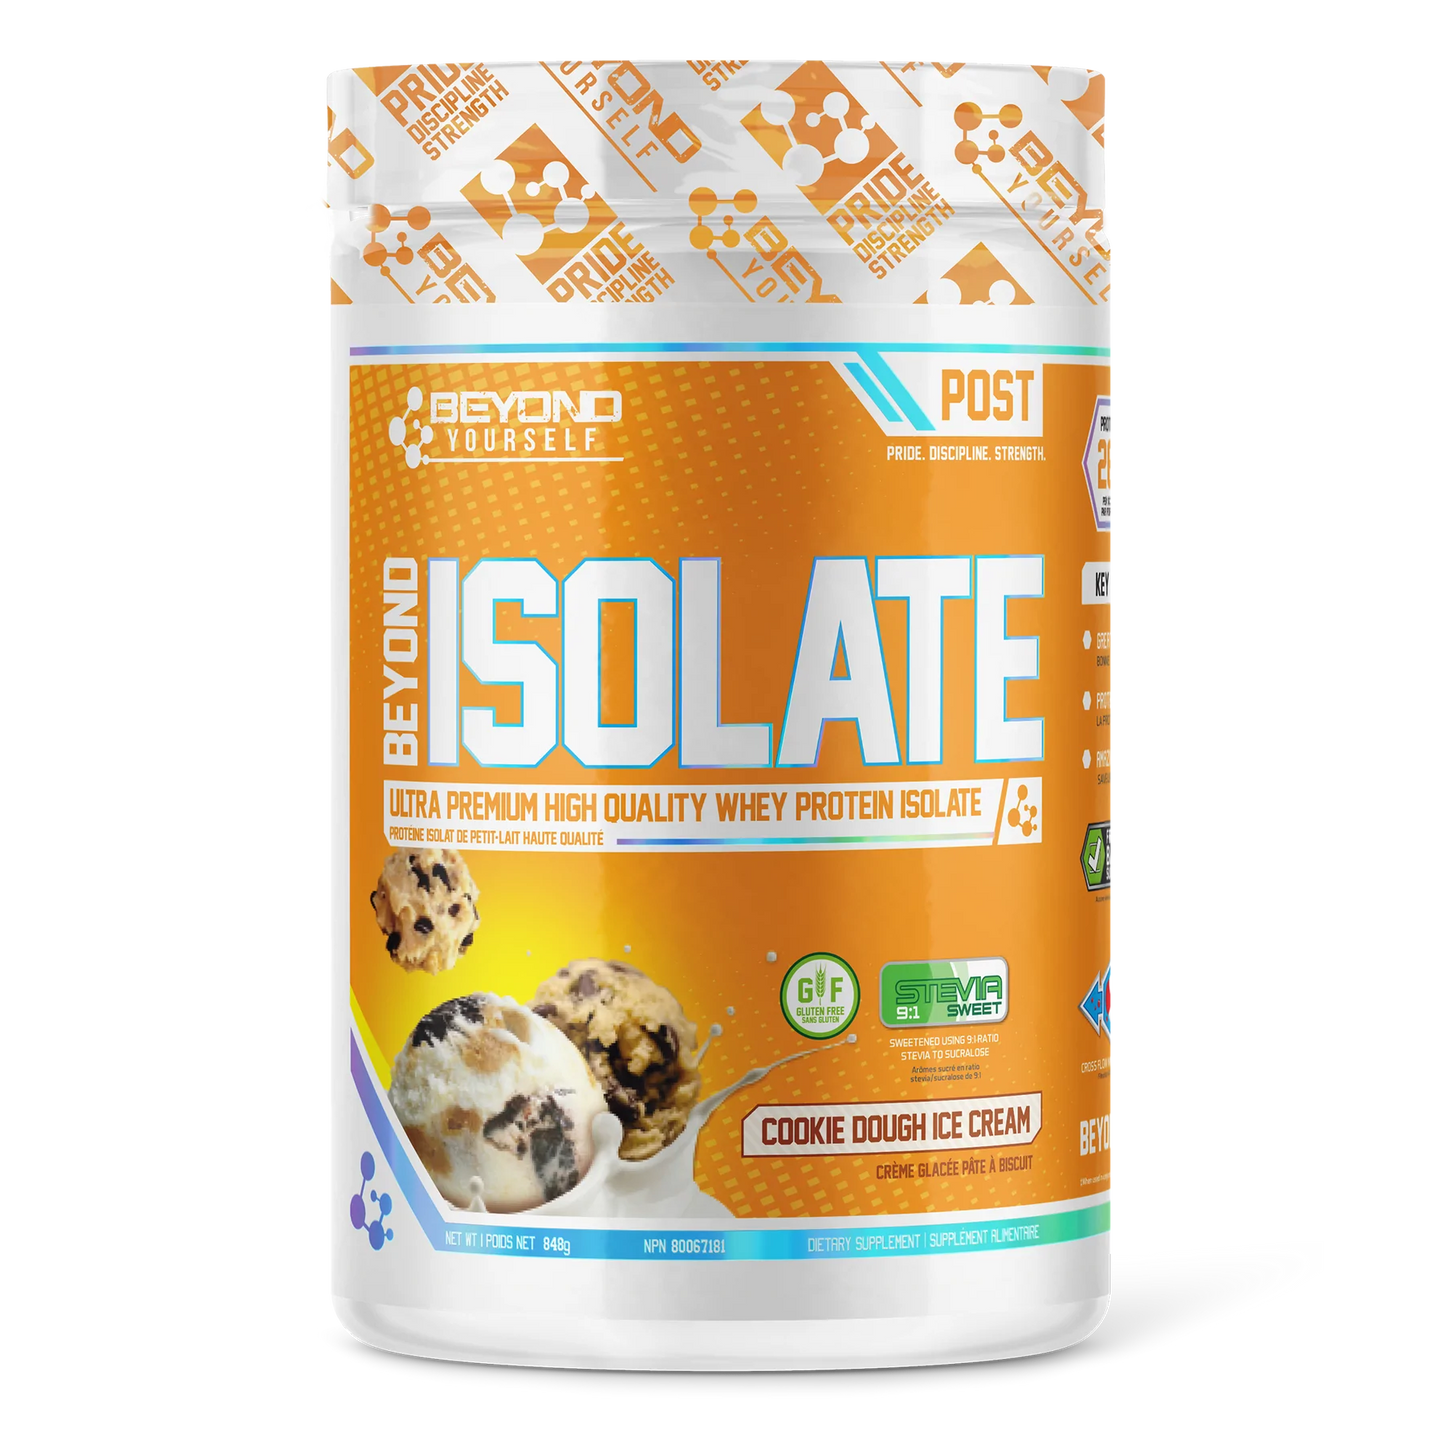 Beyond Yourself 2lbs Whey Isolate Cookie Dough Ice Cream